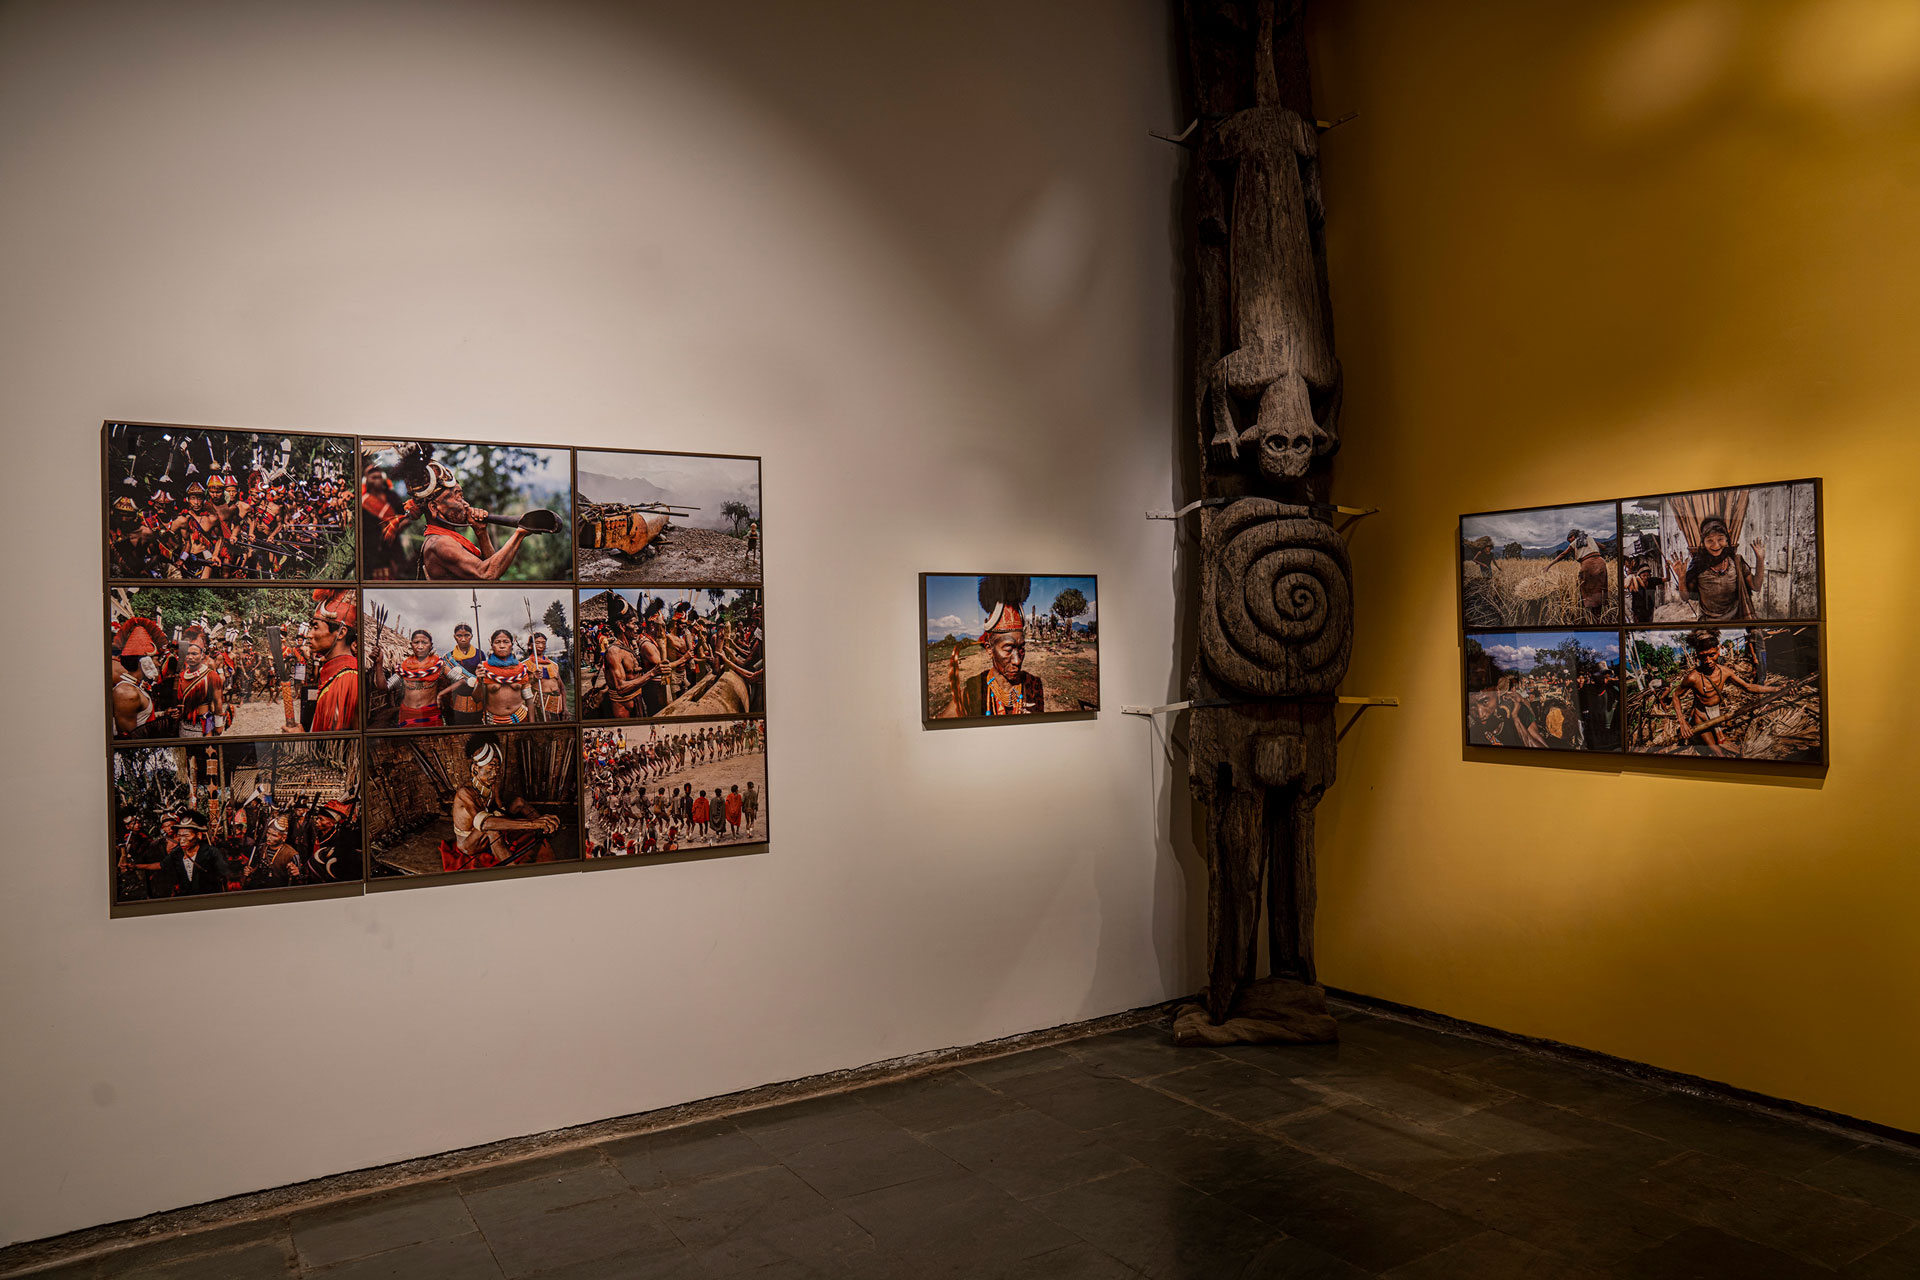 001_Install-shots-of-THE-NAGAS_DSC8901